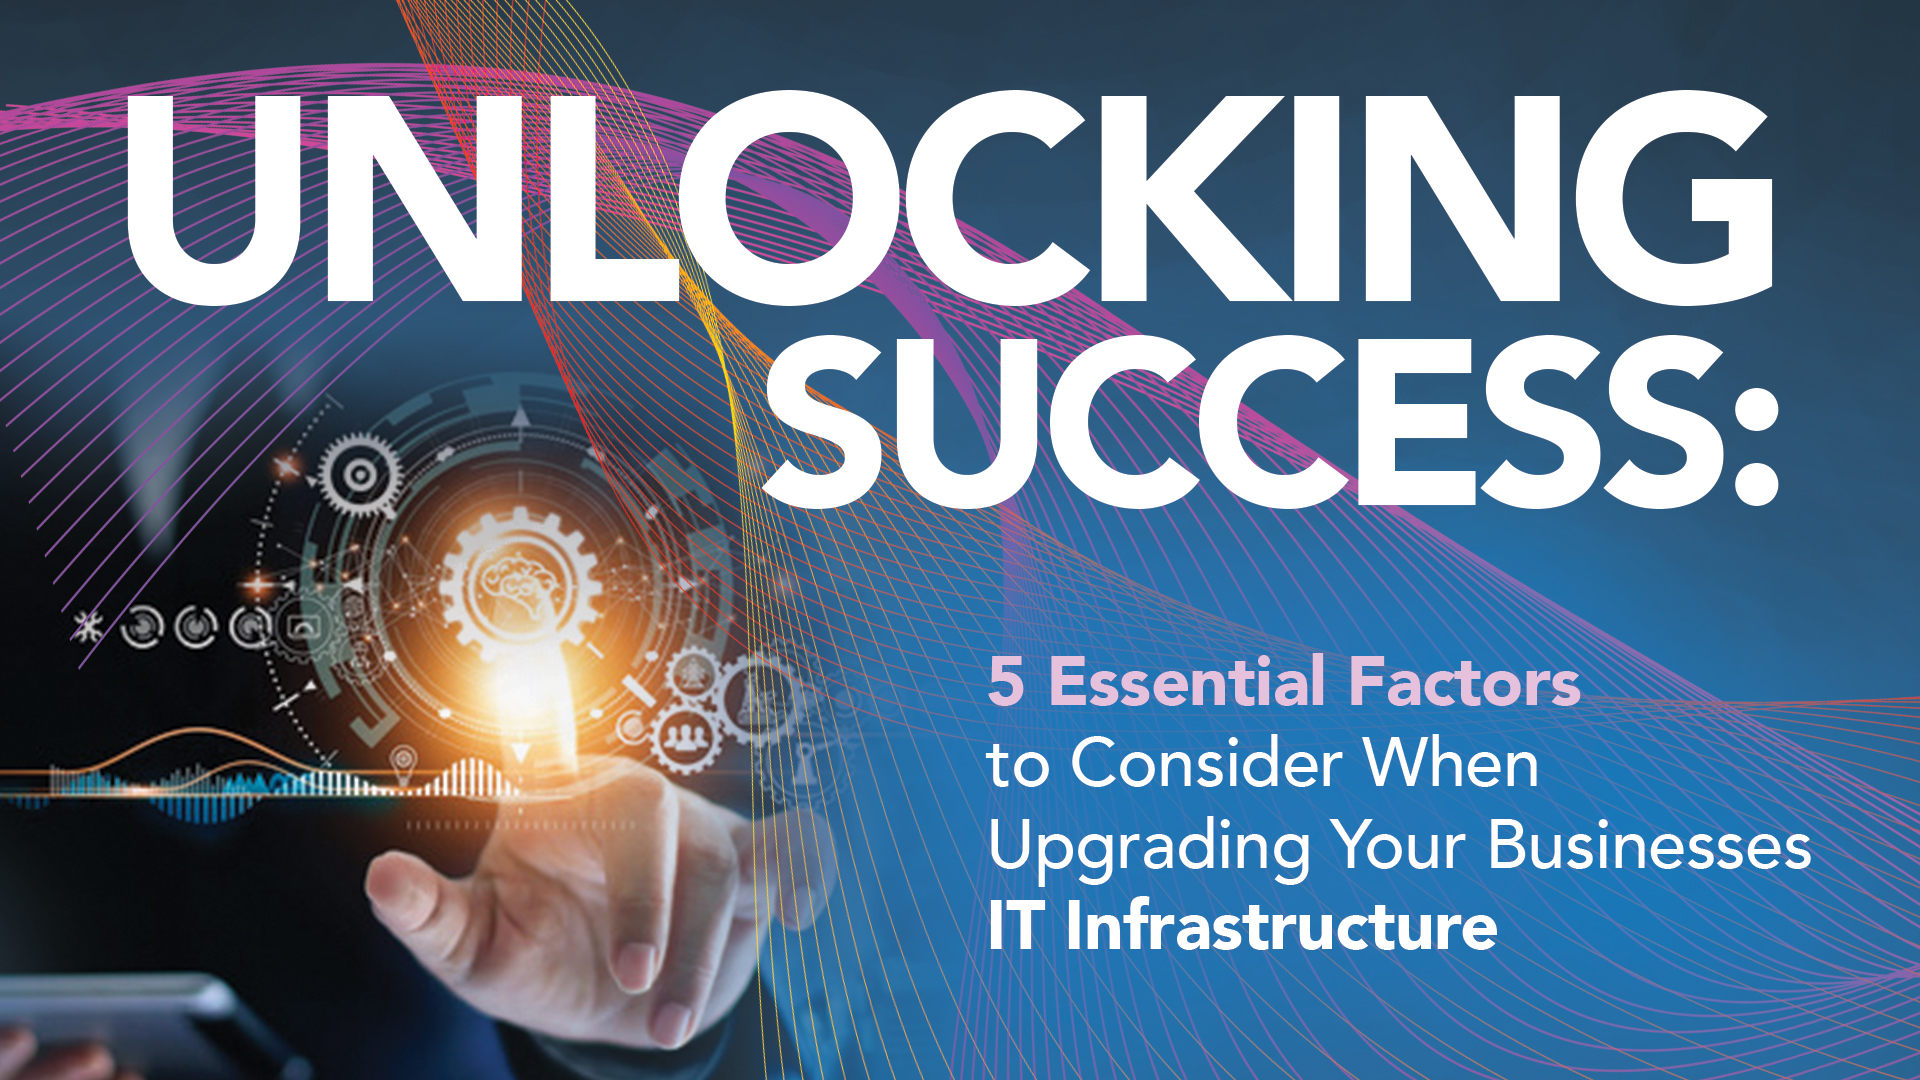 A blog discussing things to consider when upgrading your IT infrastructure